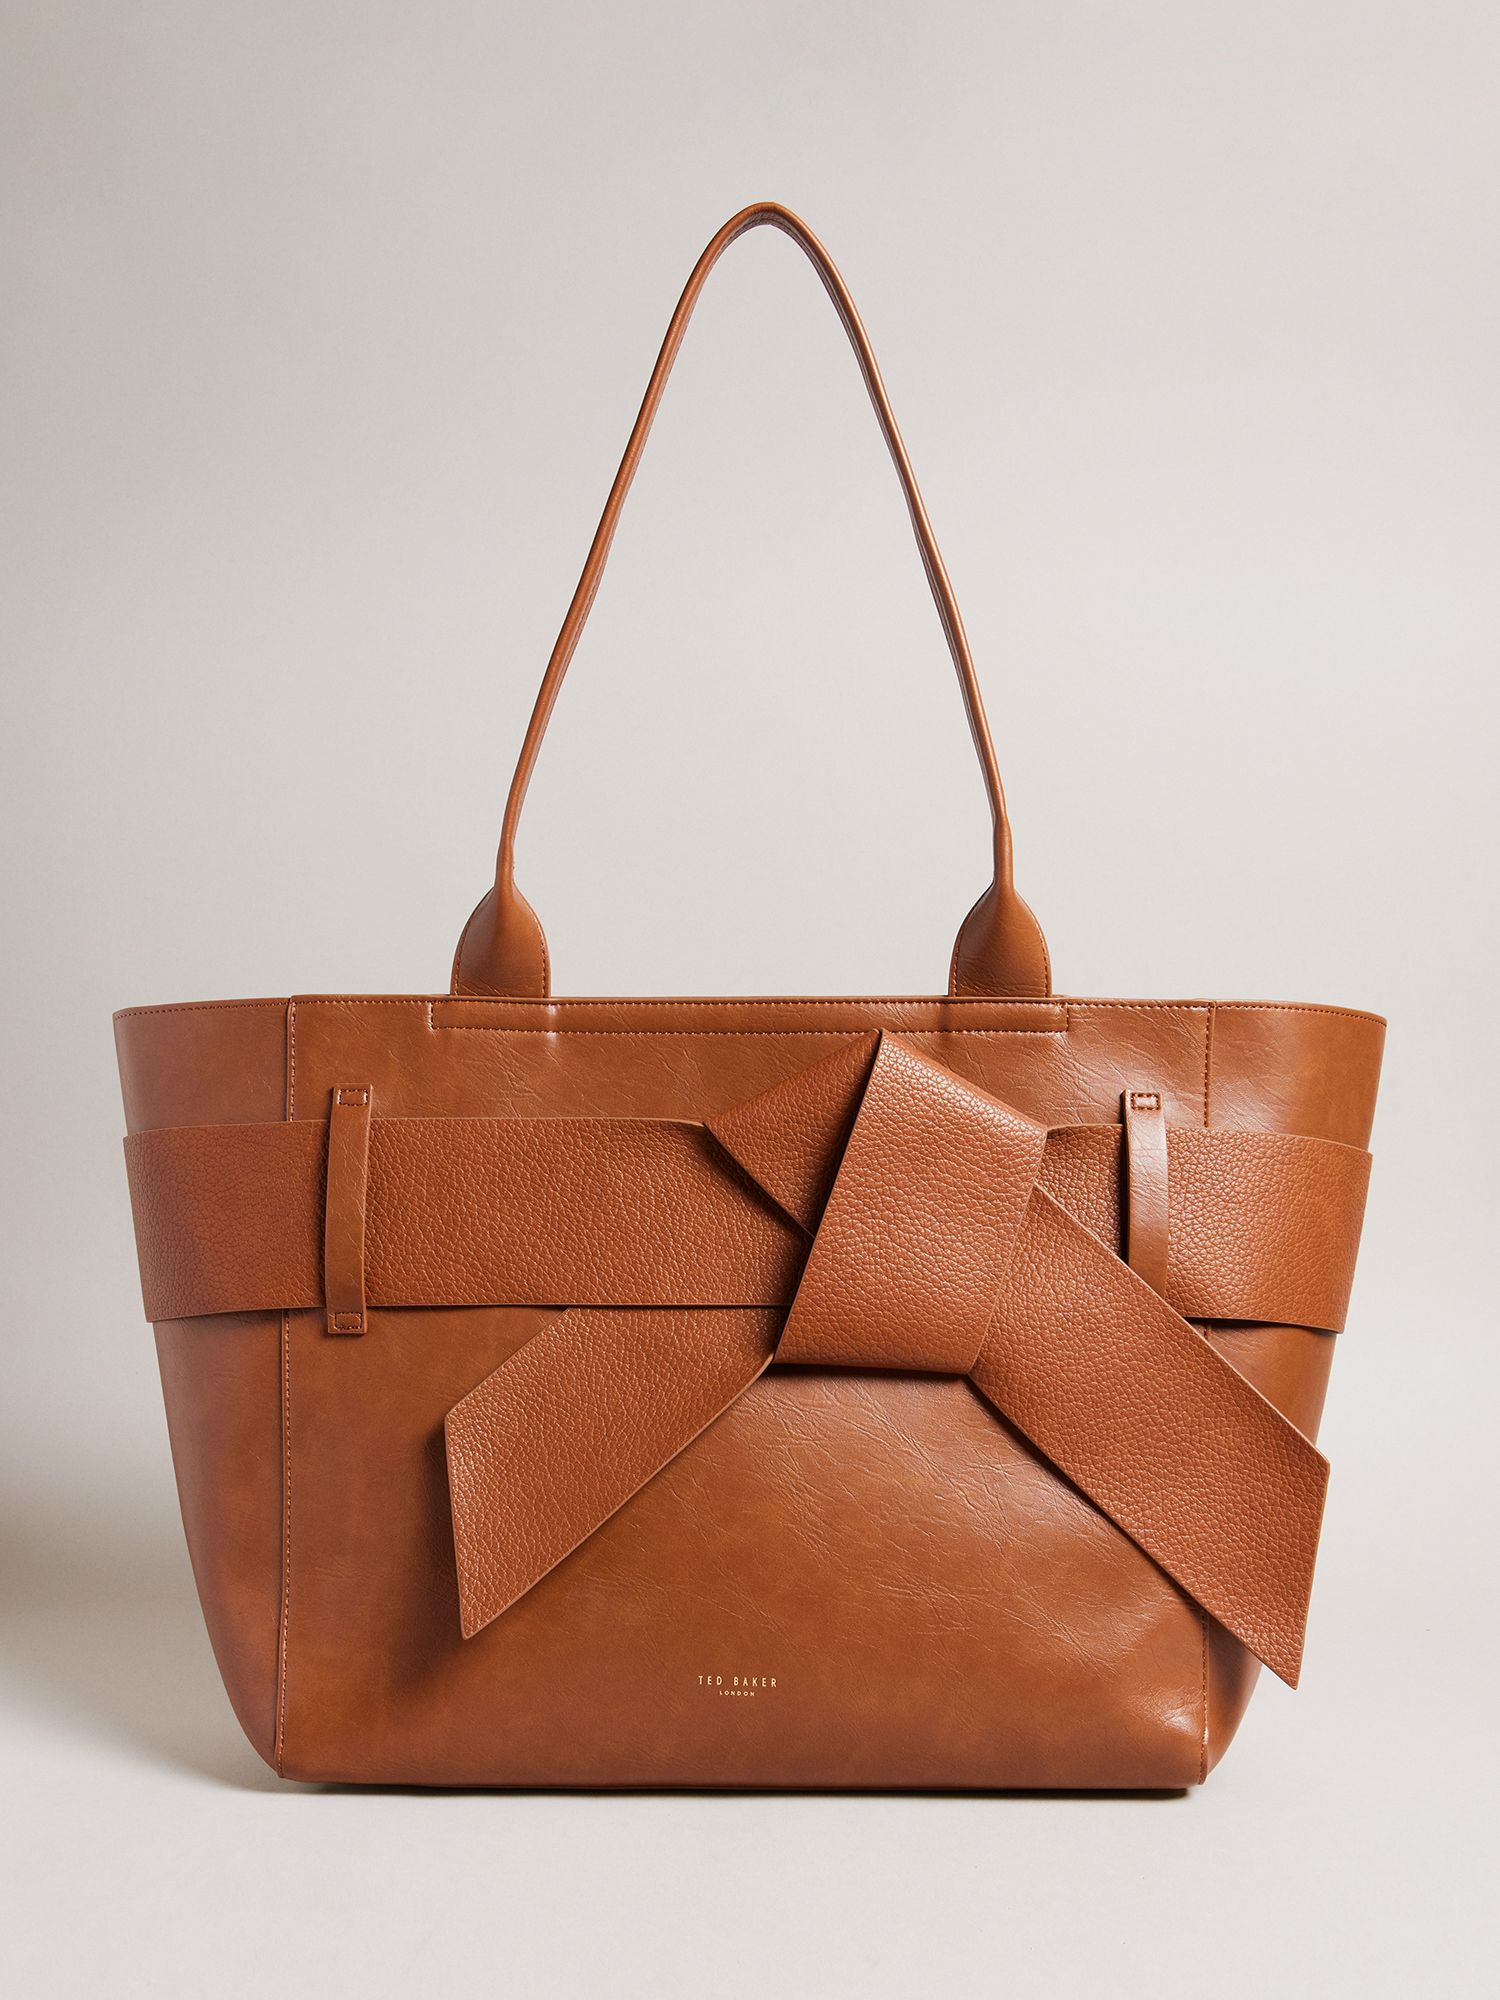 Ritmisch Doe mijn best hooi Ted Baker Jimma Bow Large Tote Bag, Brown at John Lewis & Partners